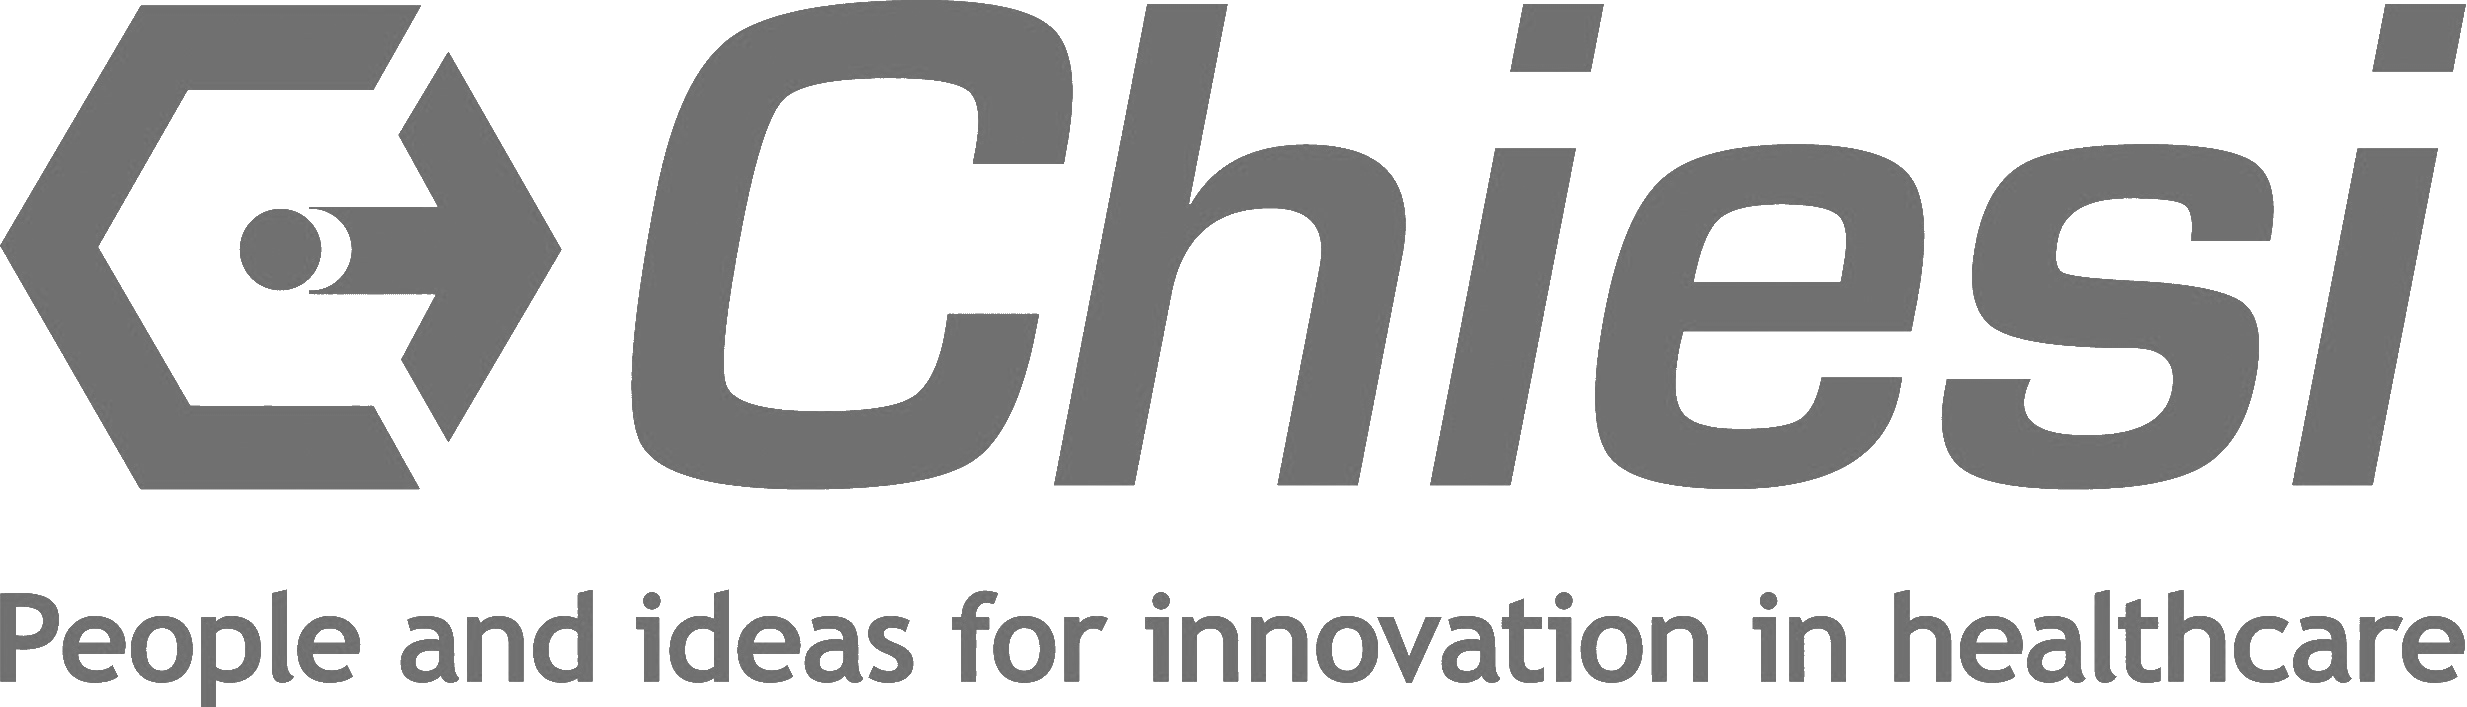 Chiesi_GmbH-kunden.png